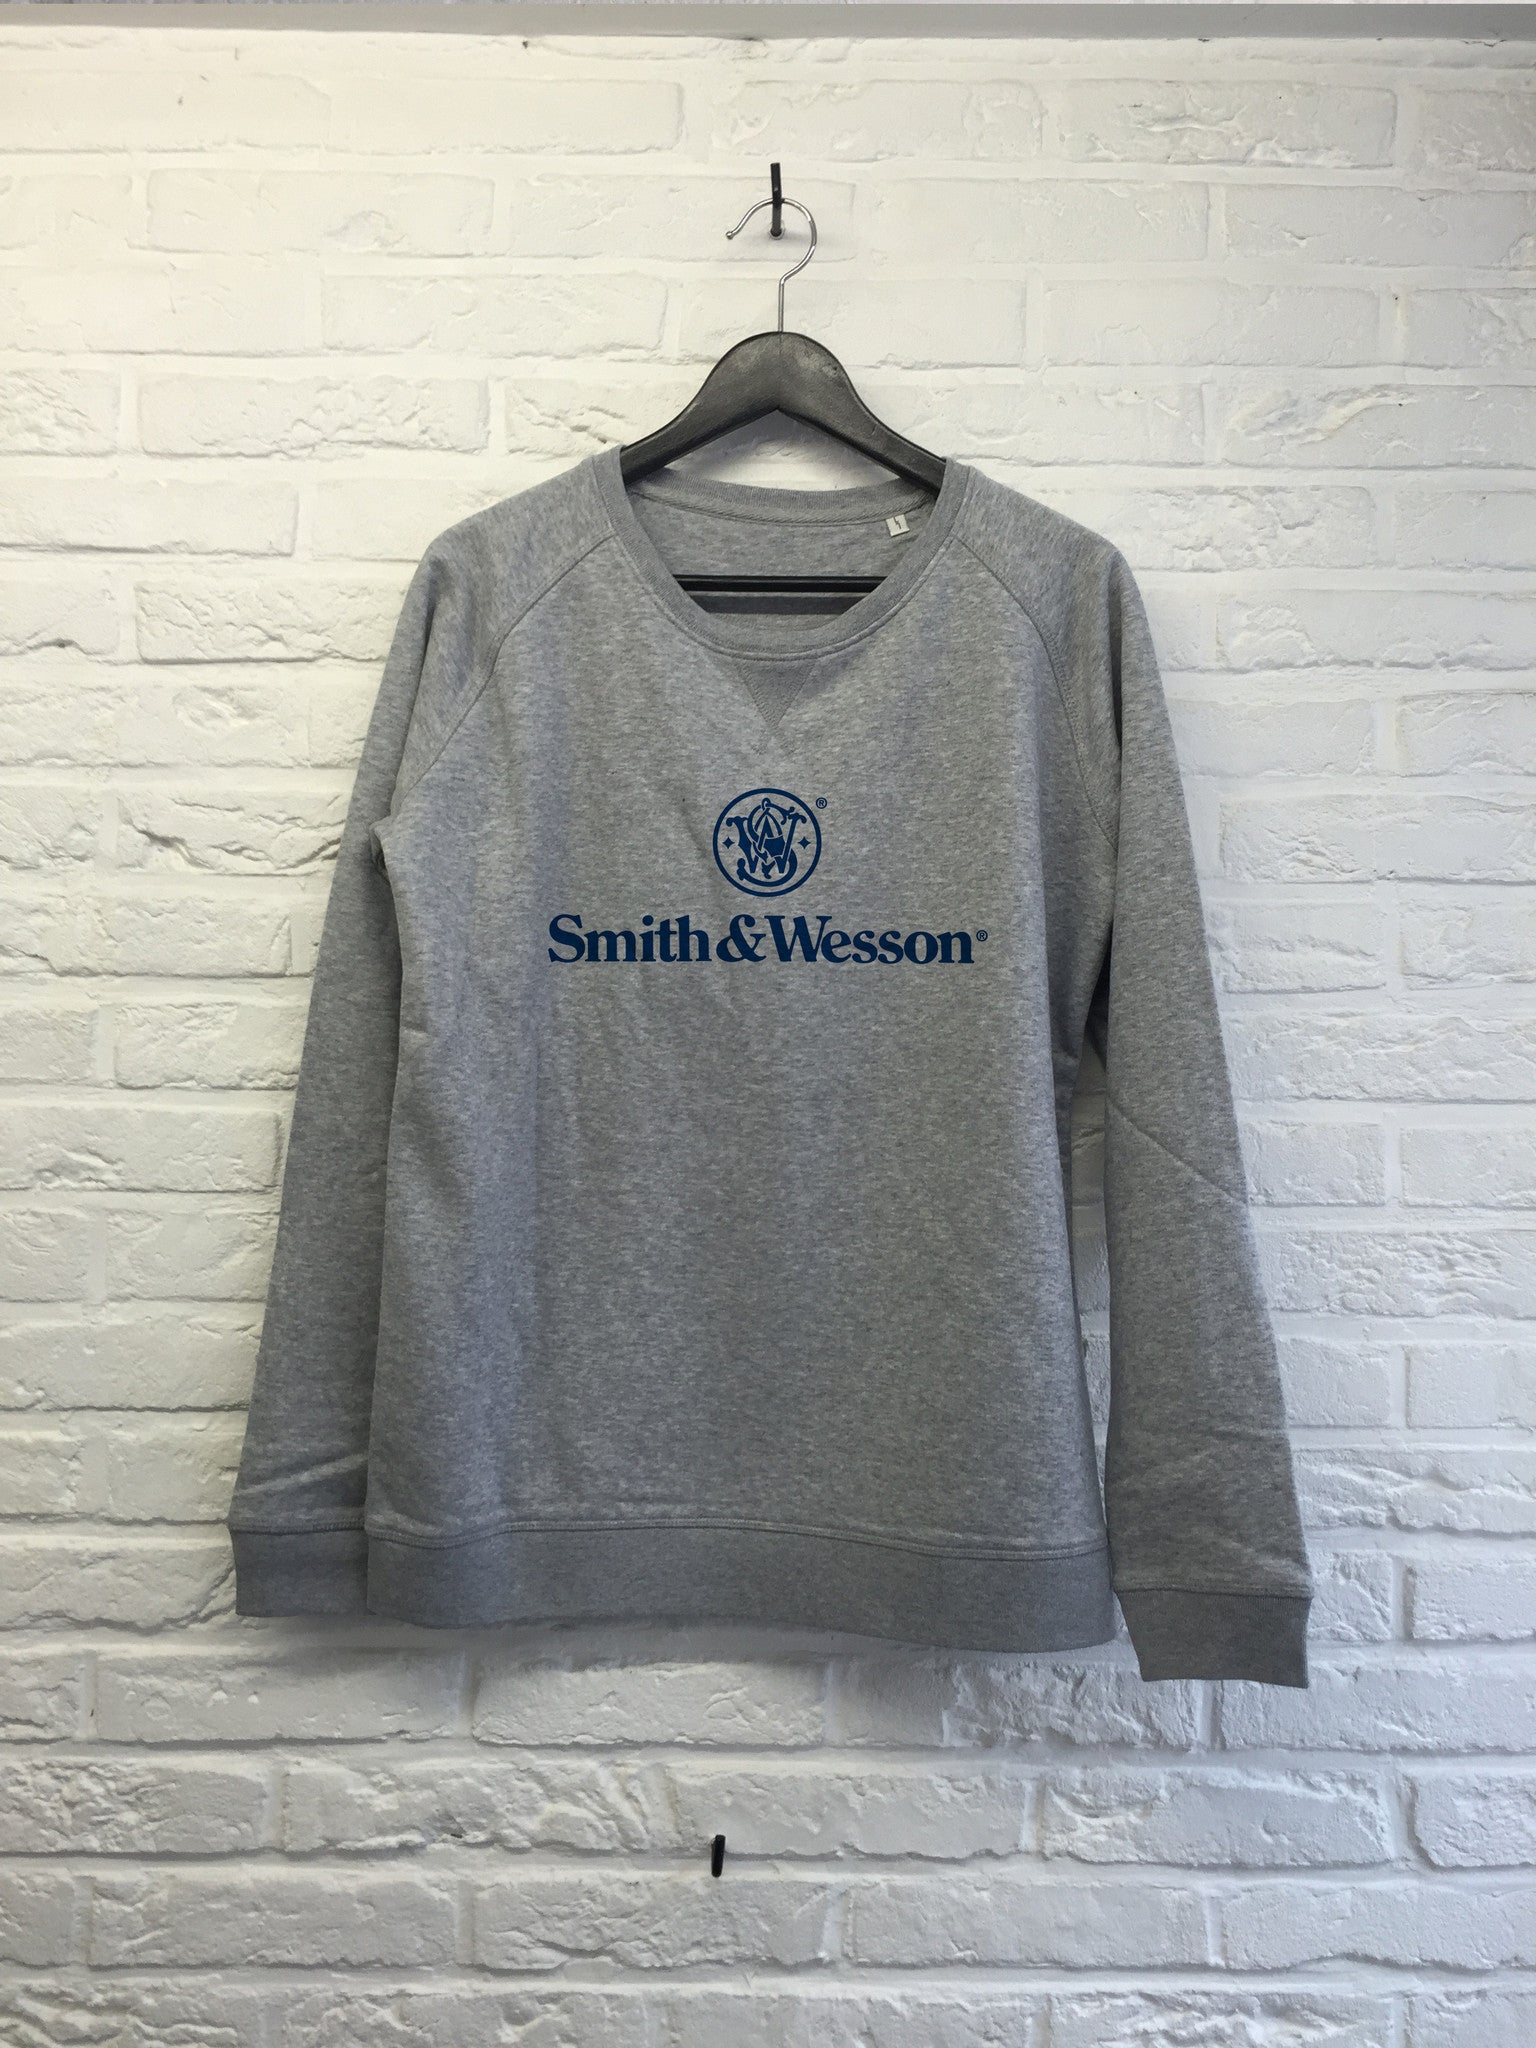 Smith & wesson - Sweat Femme-Sweat shirts-Atelier Amelot